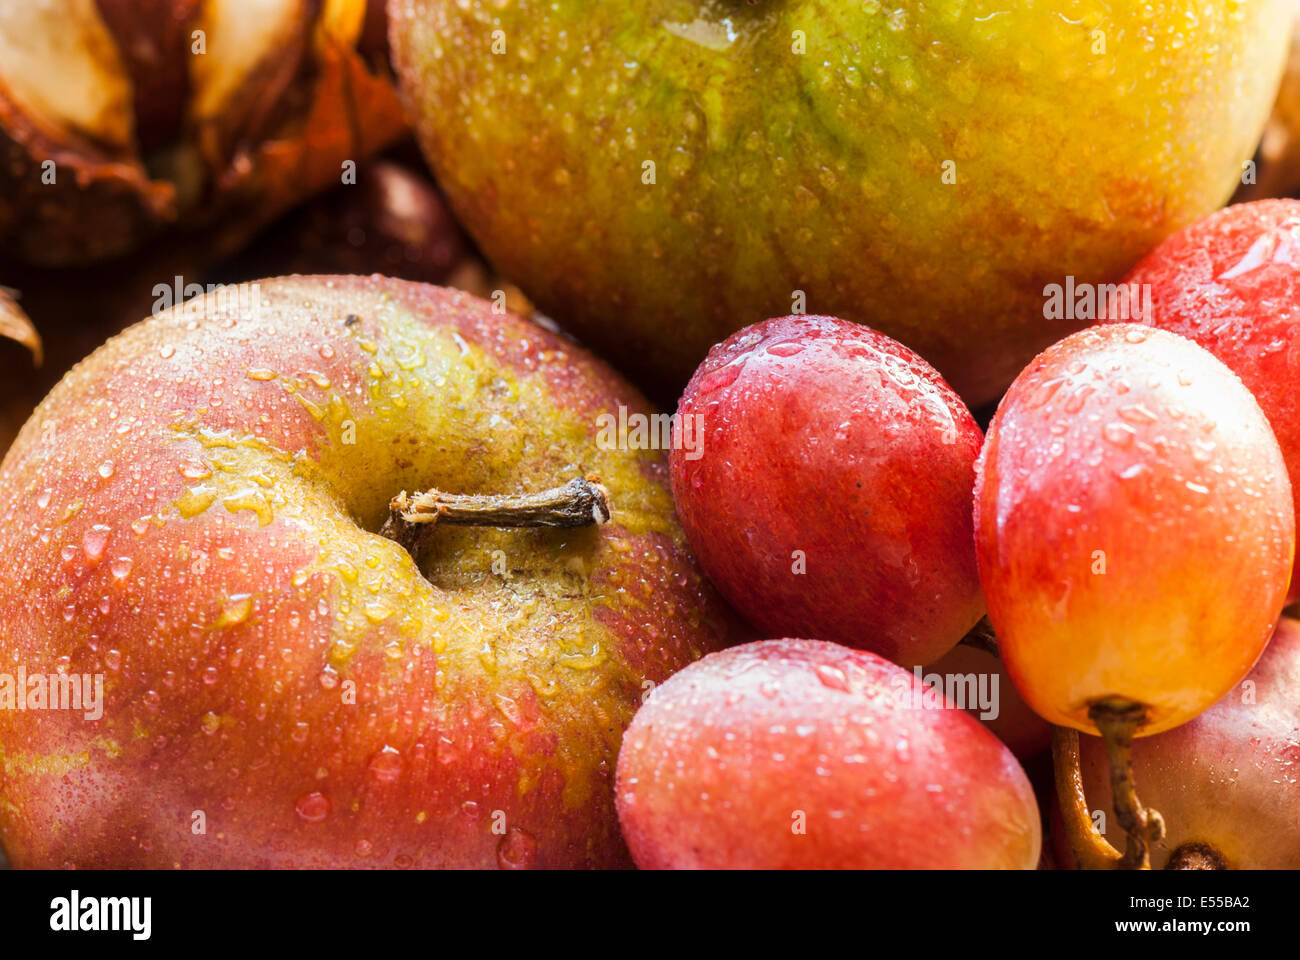 A close up, still life photograph of wet Apples and Grapes Stock Photo